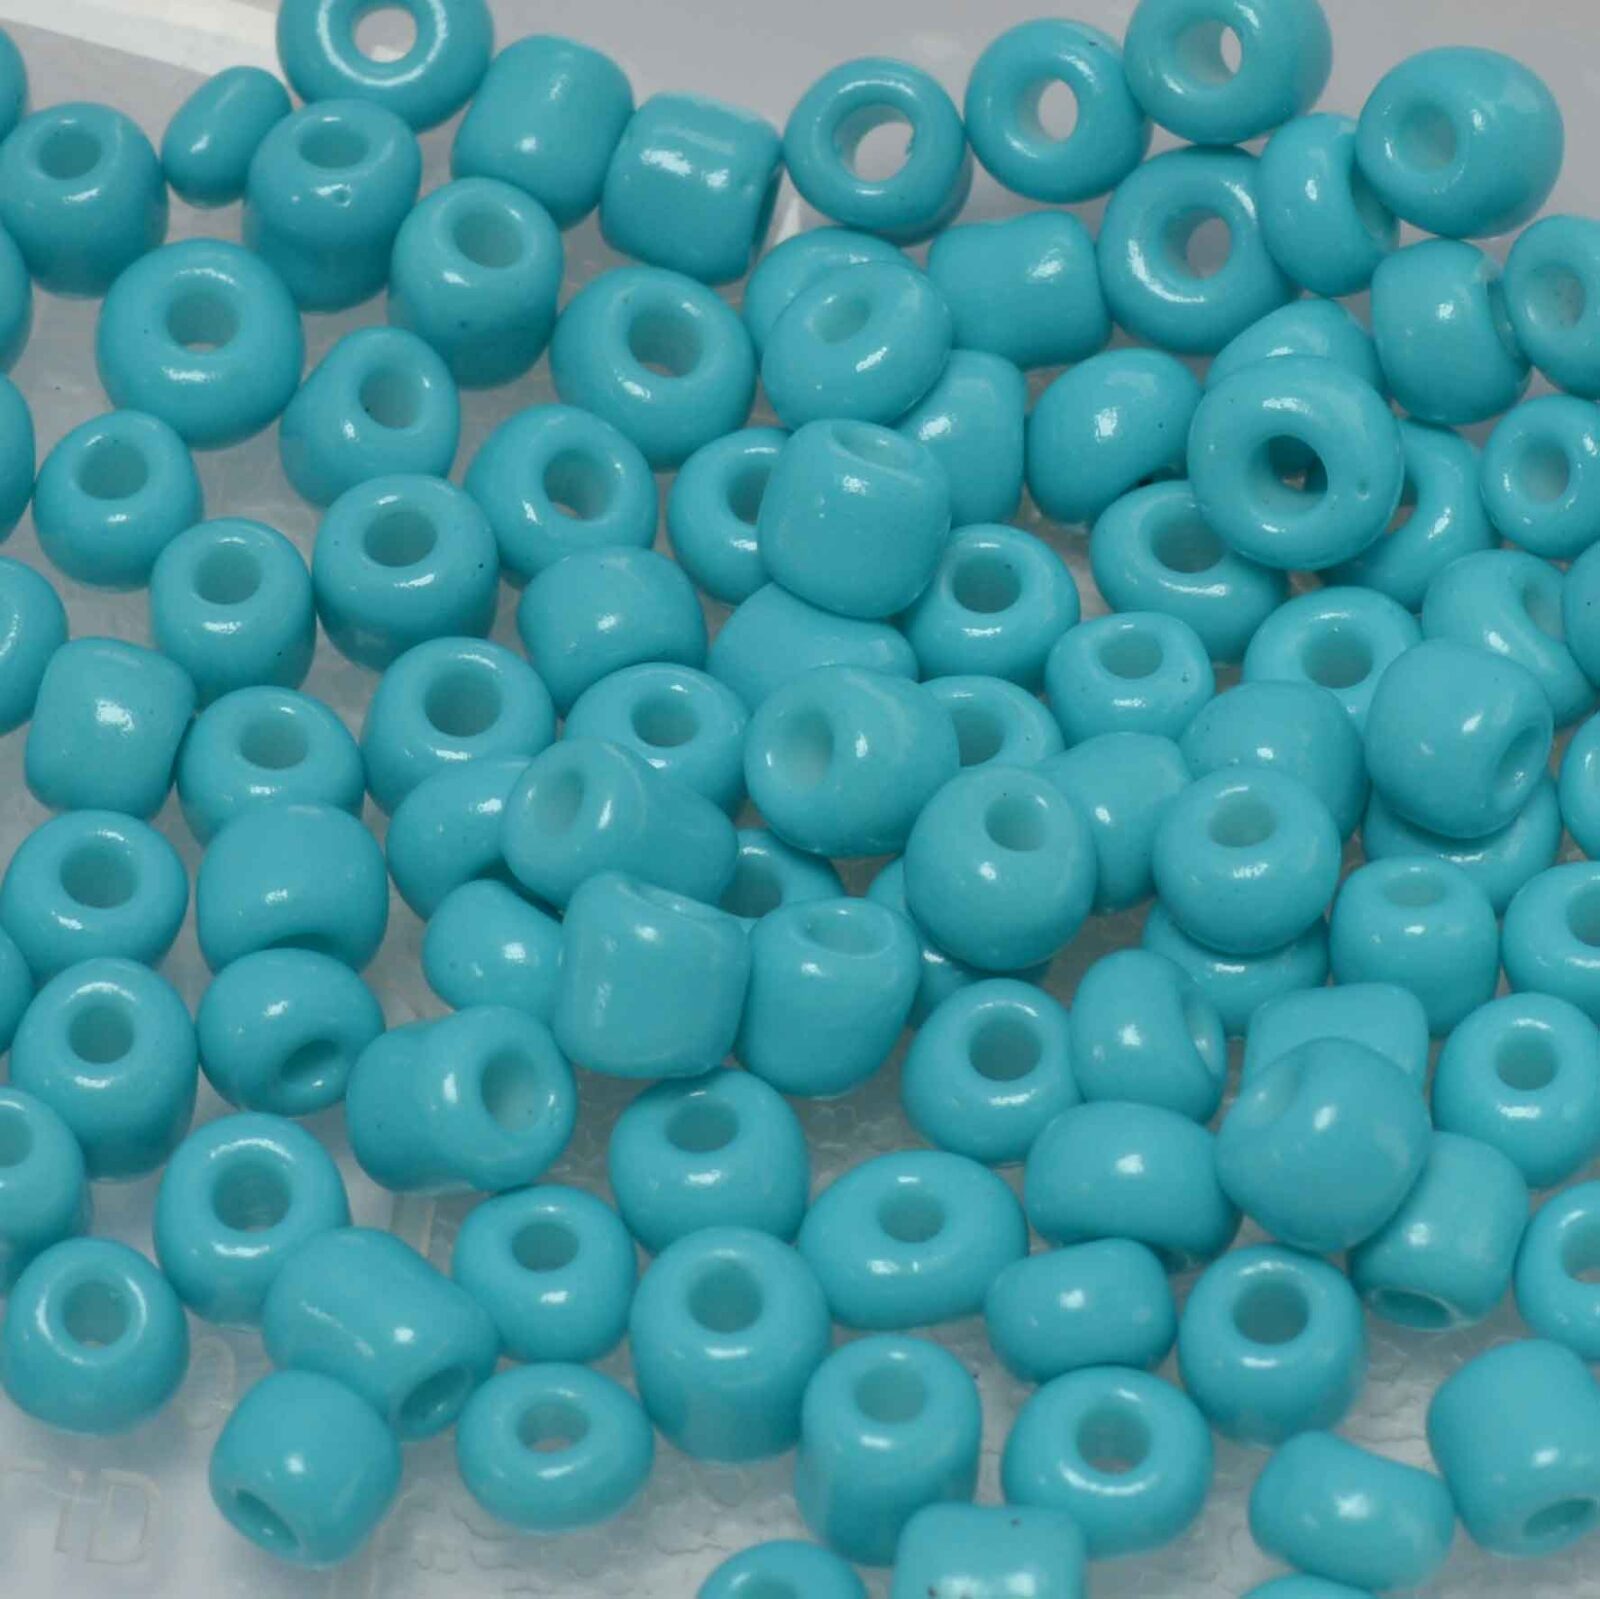 Turquoise mix rocailles - 10 gram